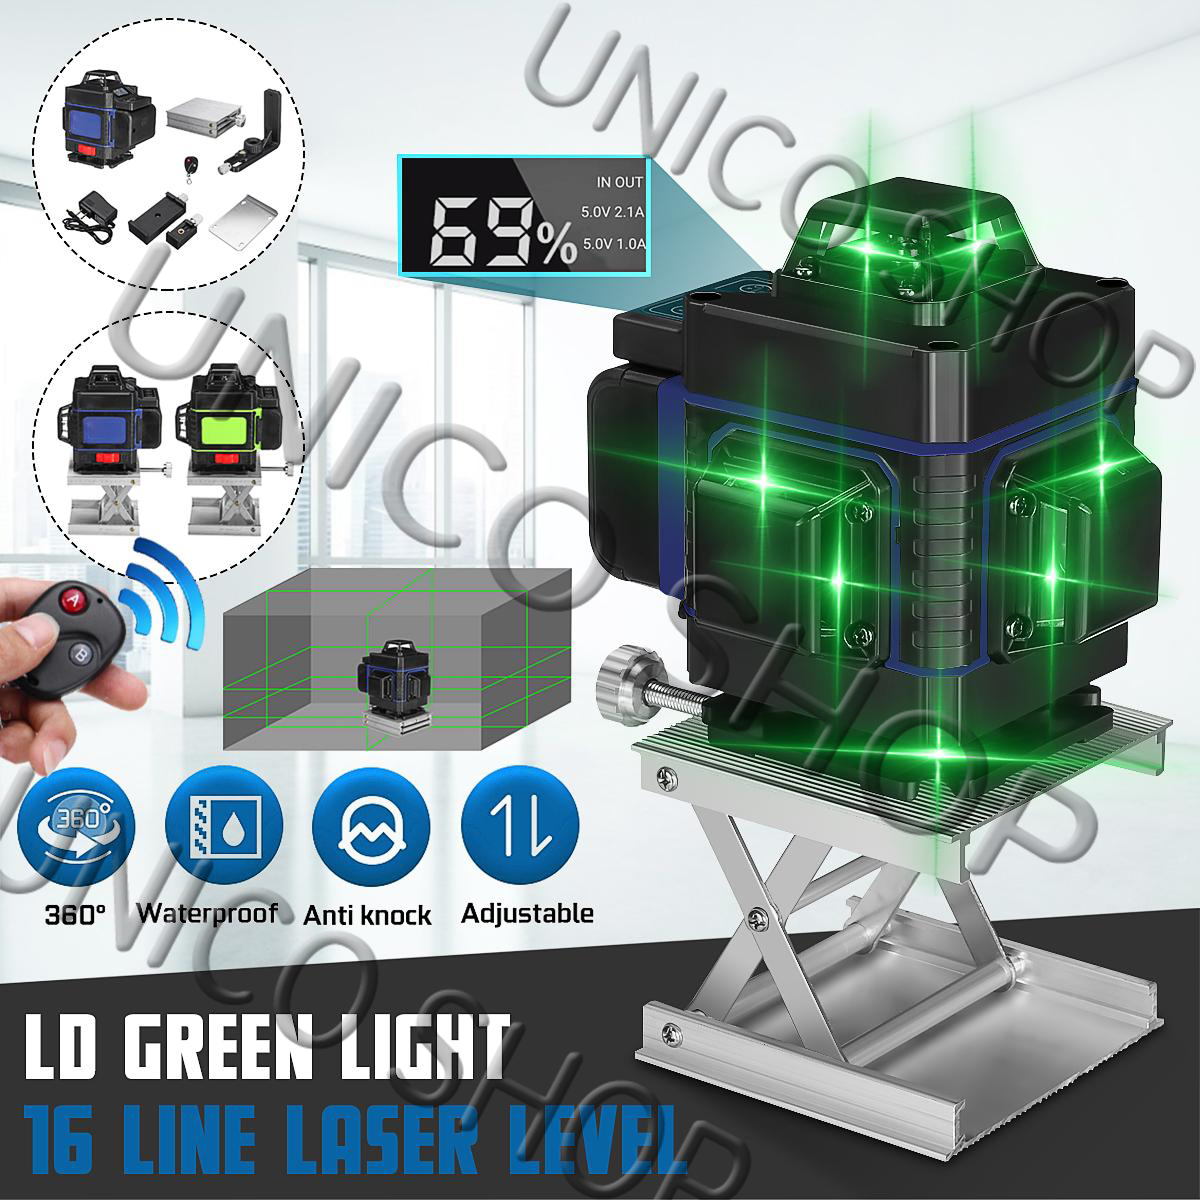 UNICO SHOP【16 Lines 4D Laser Level-6】เลเซอร์ระดับ เครื่องวัดระดับเลเซอ เลเซอร์ เลเซอร์วัดระดับ green line Self-Leveling 360 Horizontal And Vertical Super Powerful Laser level green Beam laser level ระดับเลเซอร์ เลเซอร์ระดับ